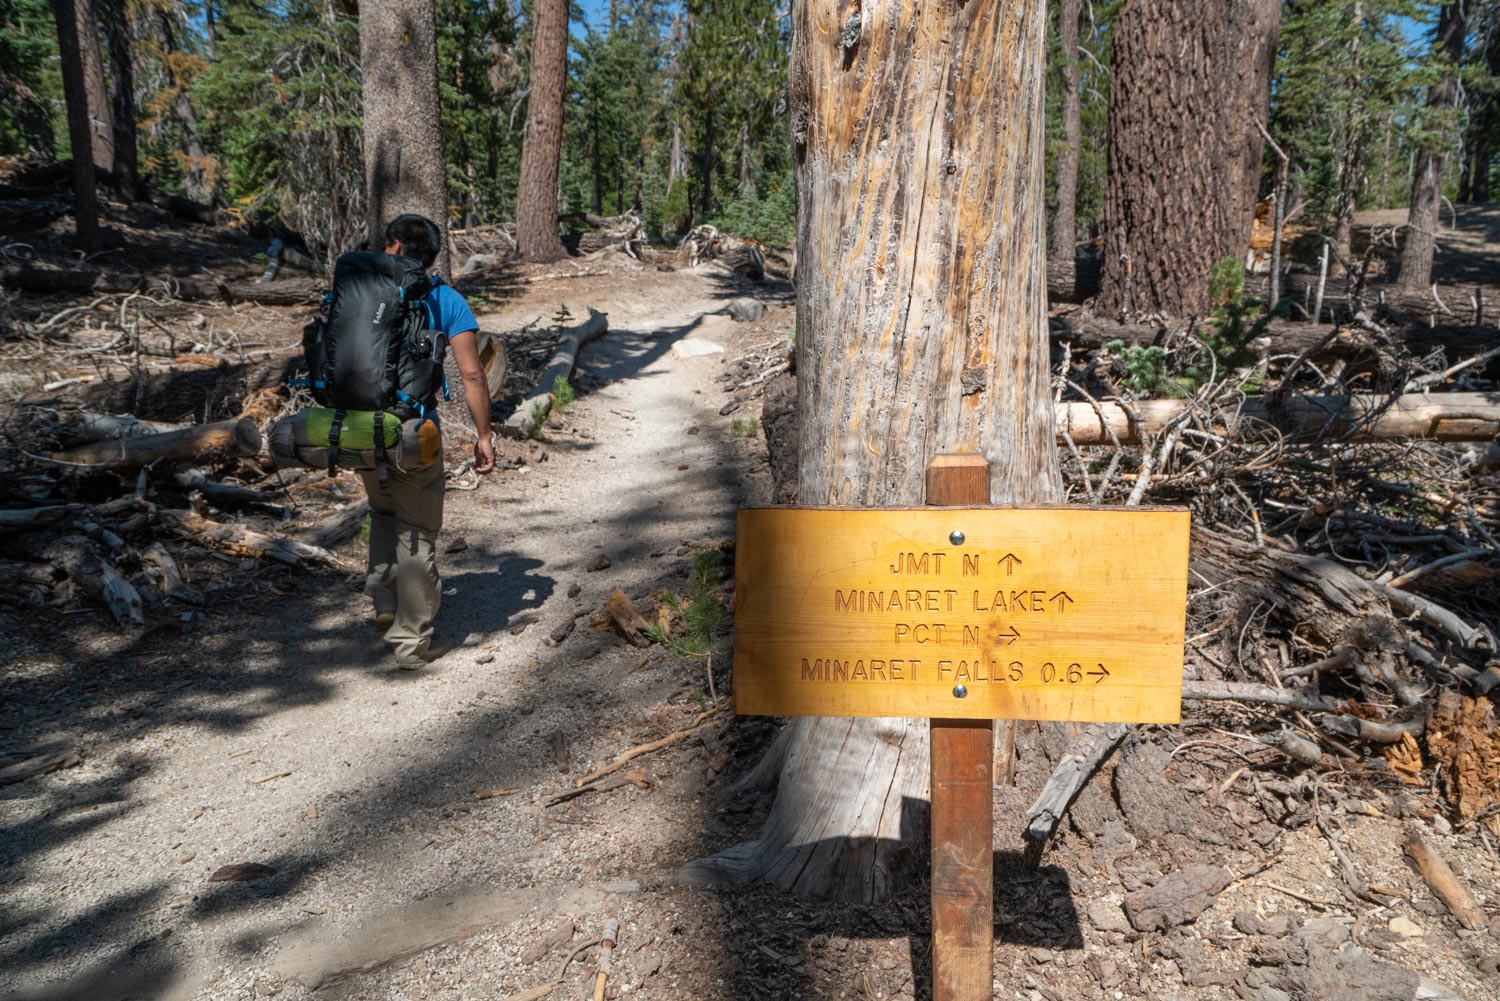 Passing the PCT junction